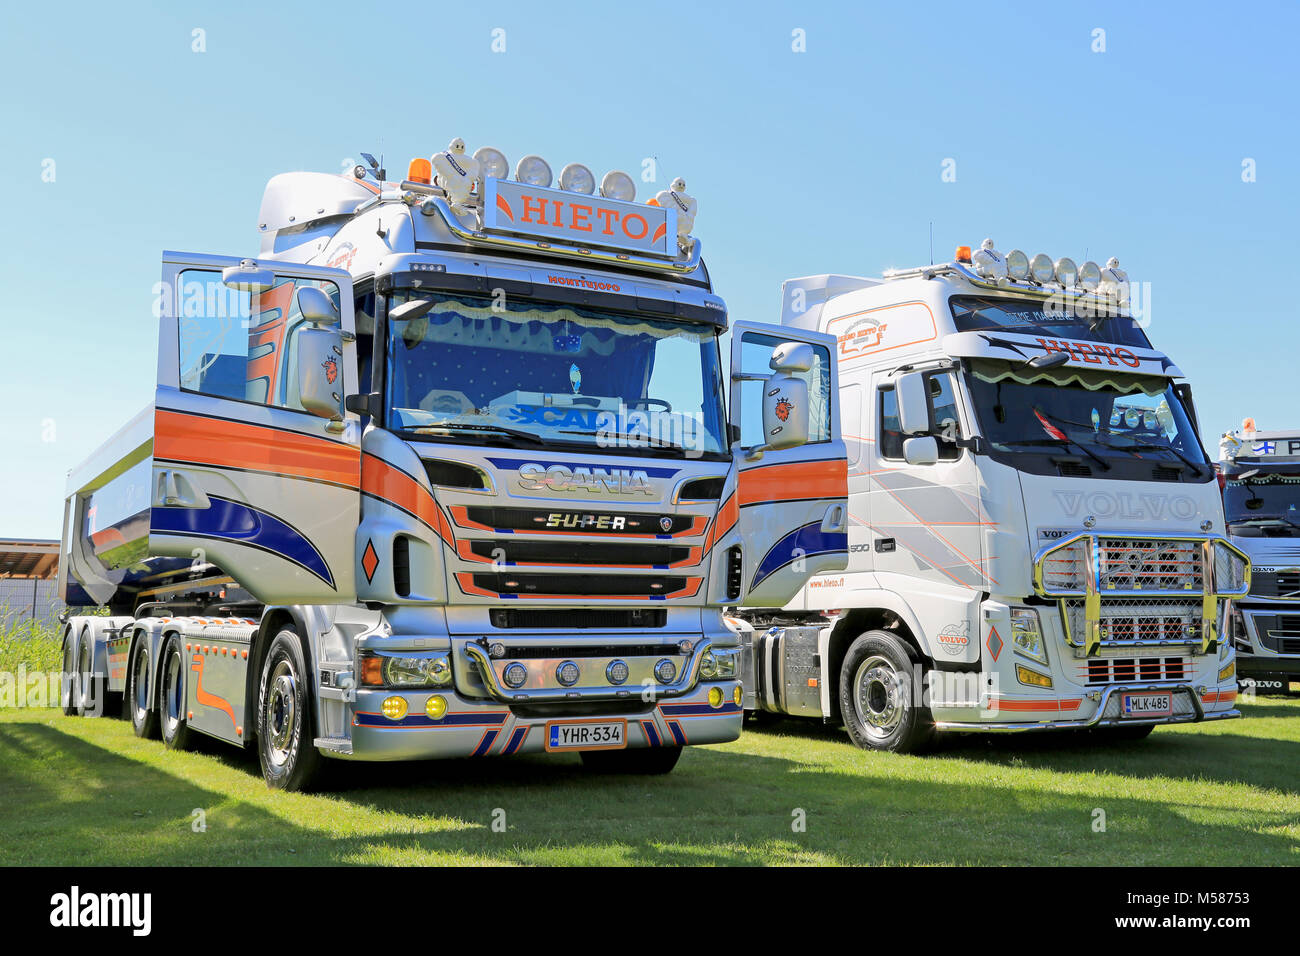 PORVOO, FINLAND - JUNE 28, 2014: Scania V8 and Volvo FH 500 truck tractors on display side by side at Riverside Truck Meeting 2014 in Porvoo, Finland. Stock Photo